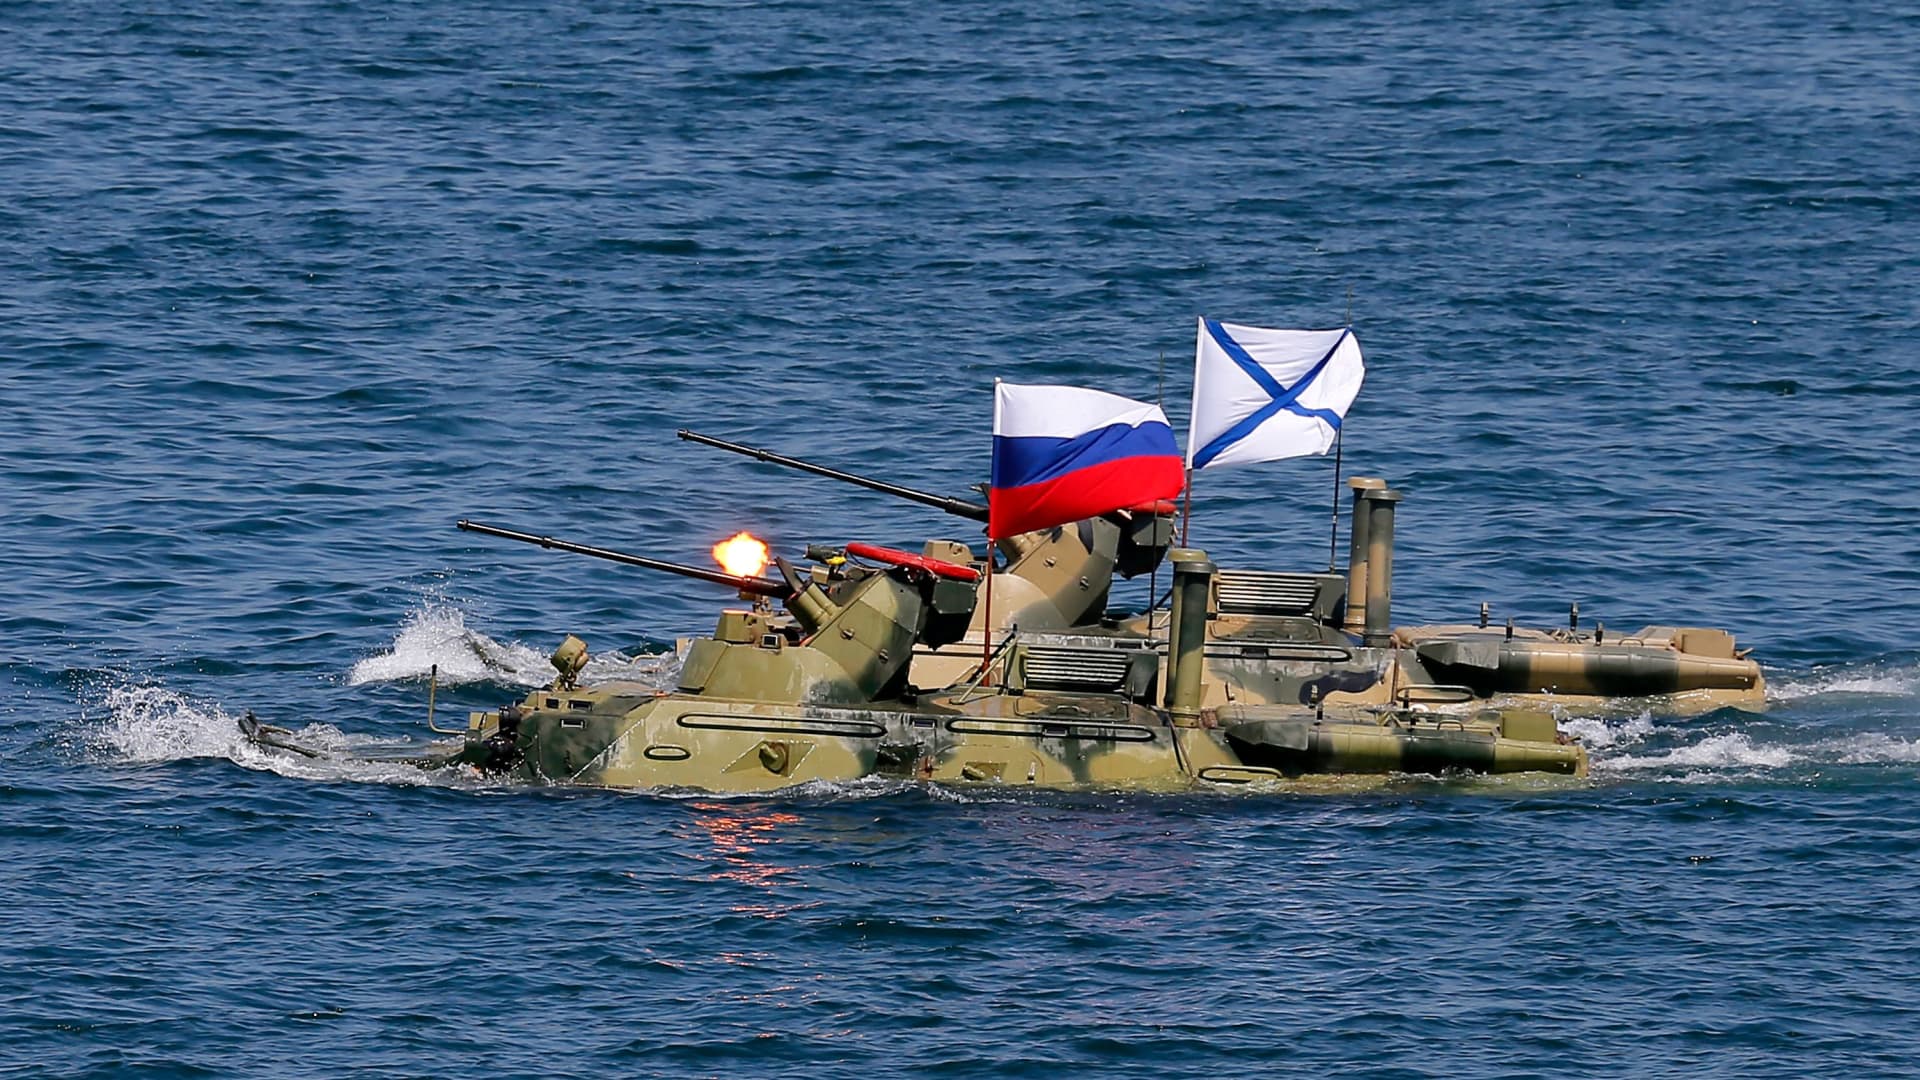 Russian armoured personnel carriers sail after submerging from an amphibious assault ship during a parade as part of the Navy Day celebration in Sevastopol on July 28, 2019.